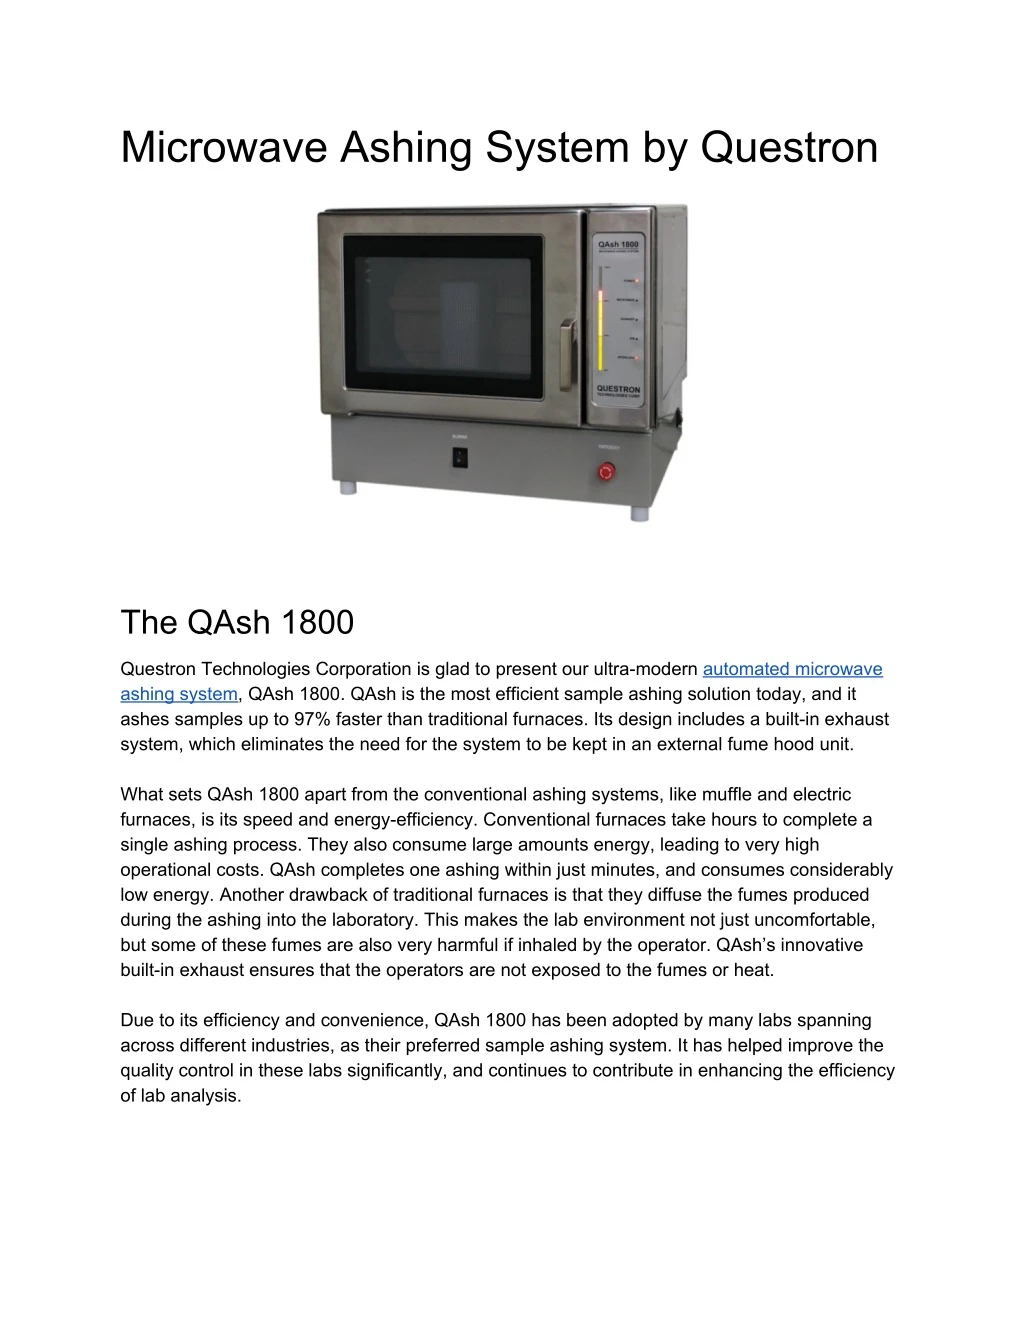 microwave ashing system by questron